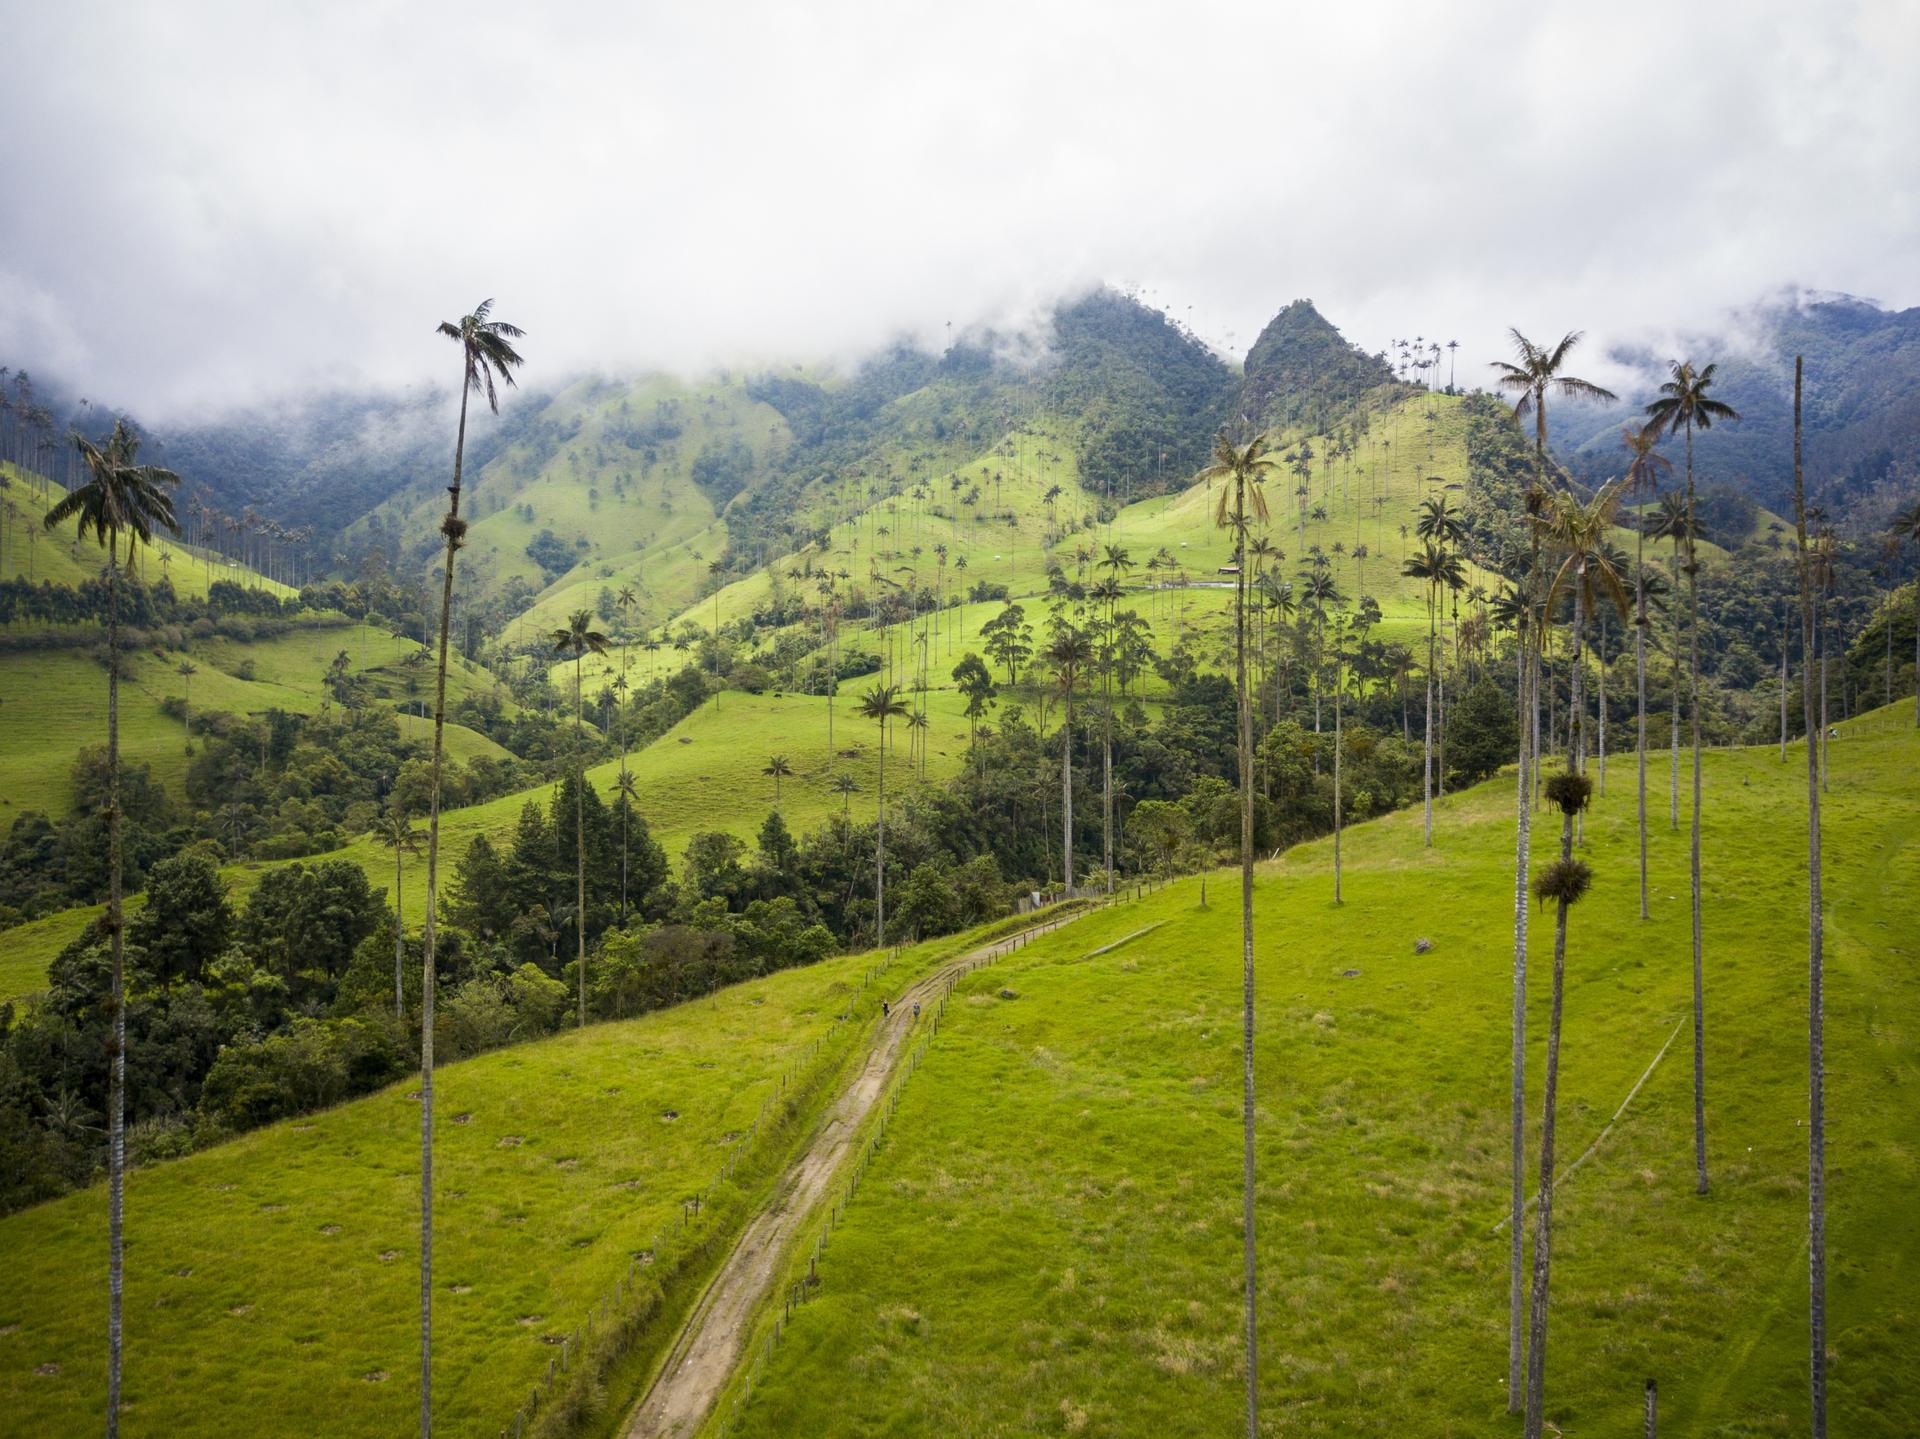 The Cocora valley in the Colombian province of Quindio inspired the landscapes in "Encanto."